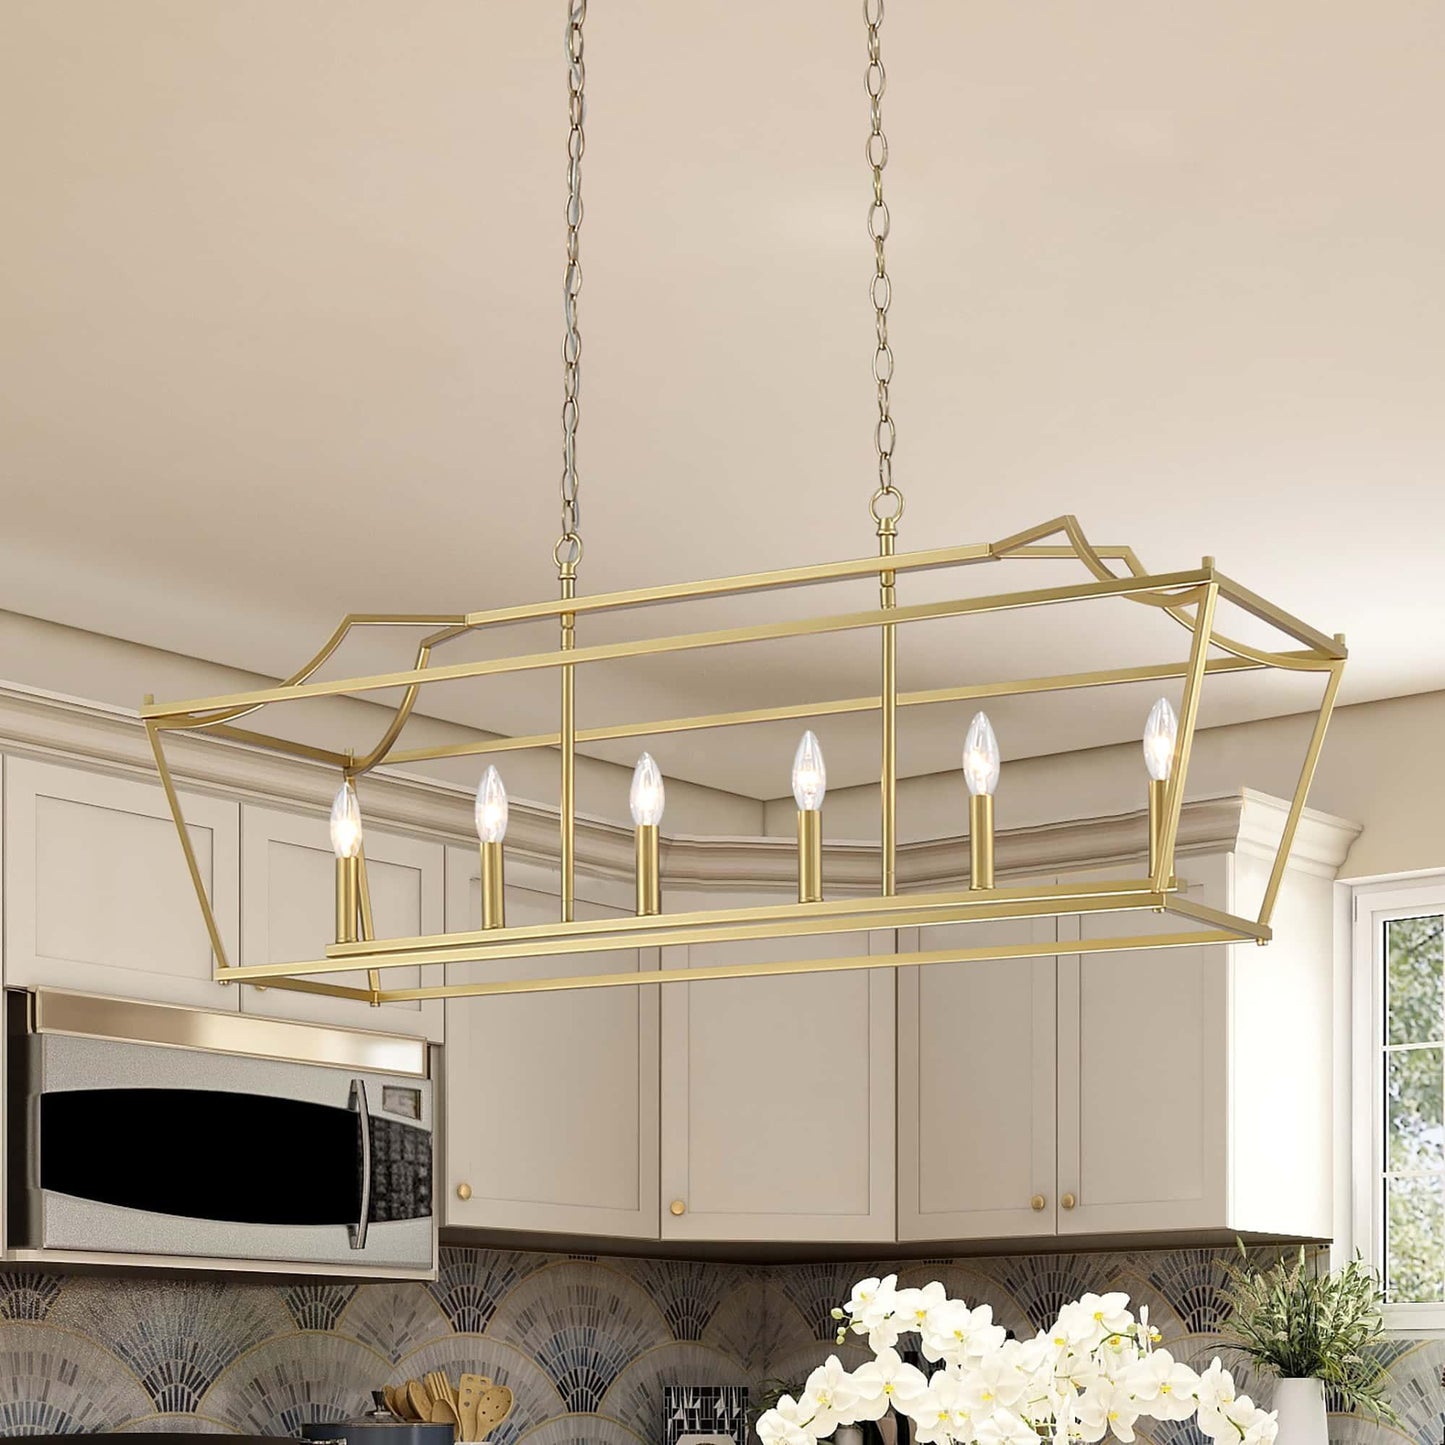 6 light linear rectangle chandelier (1) by ACROMA